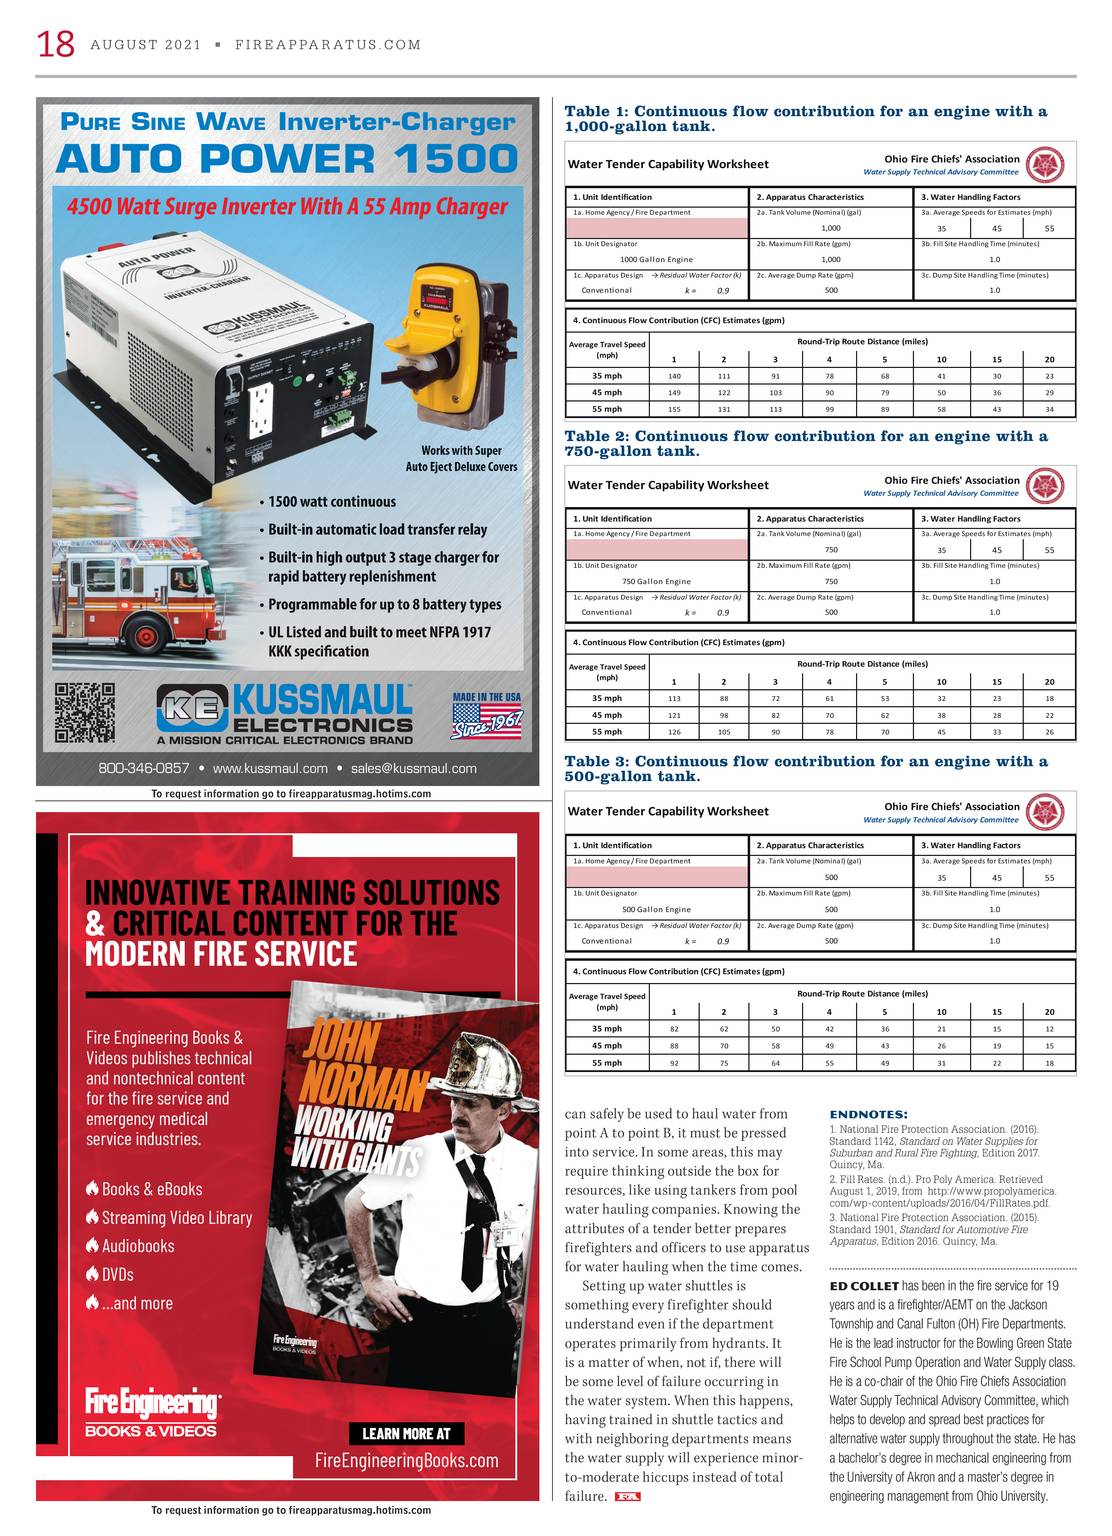 Fire Apparatus Magazine - August 2021 - page 19